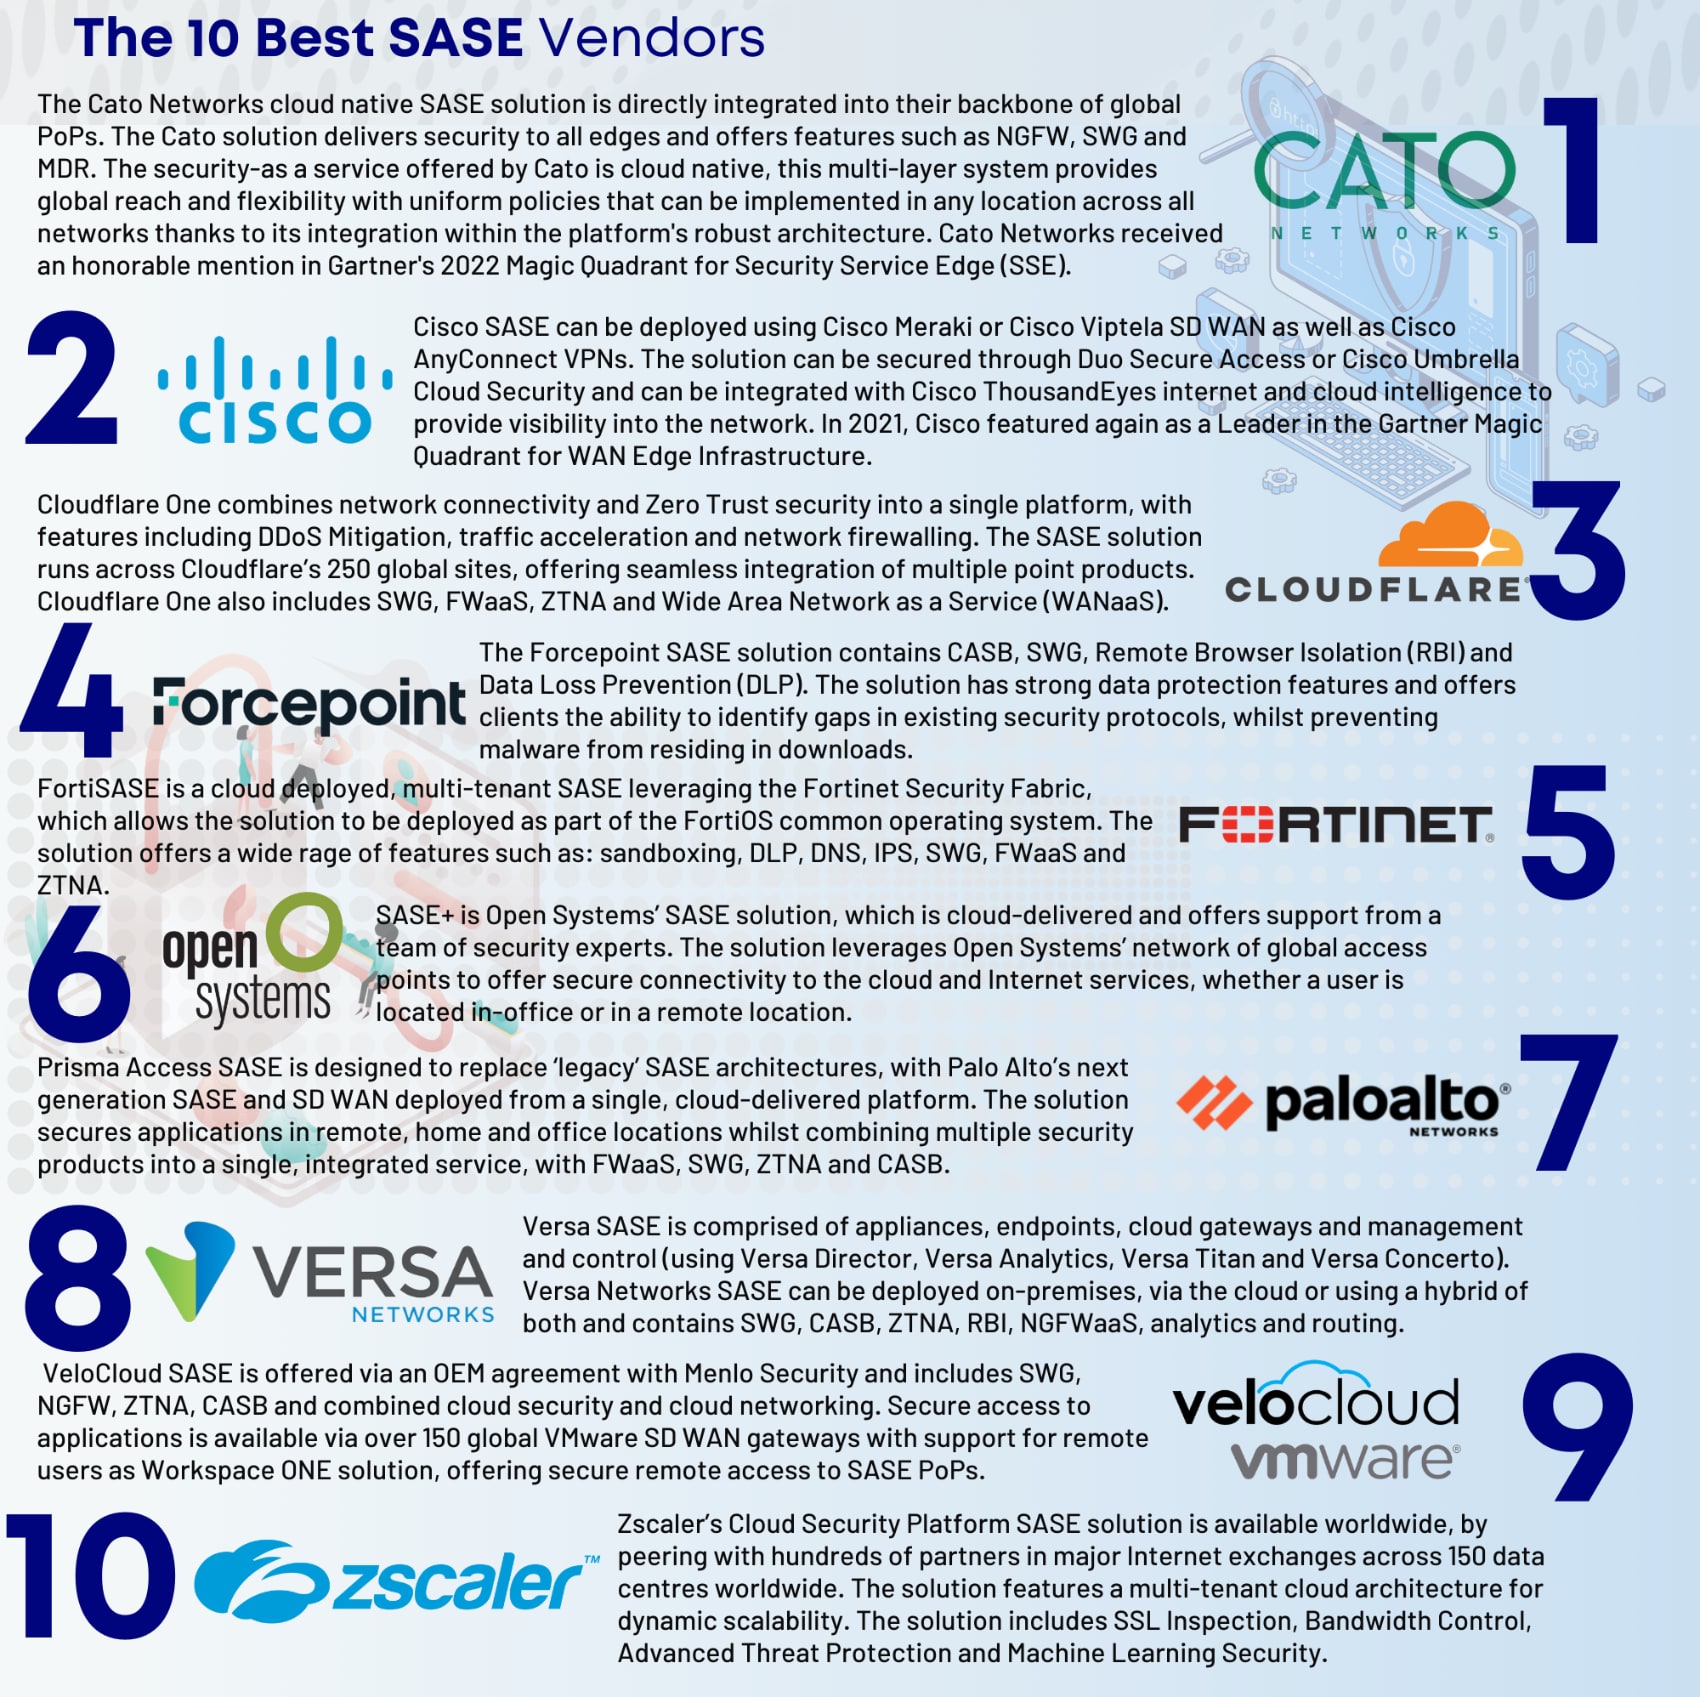 SASE Providers and Vendors